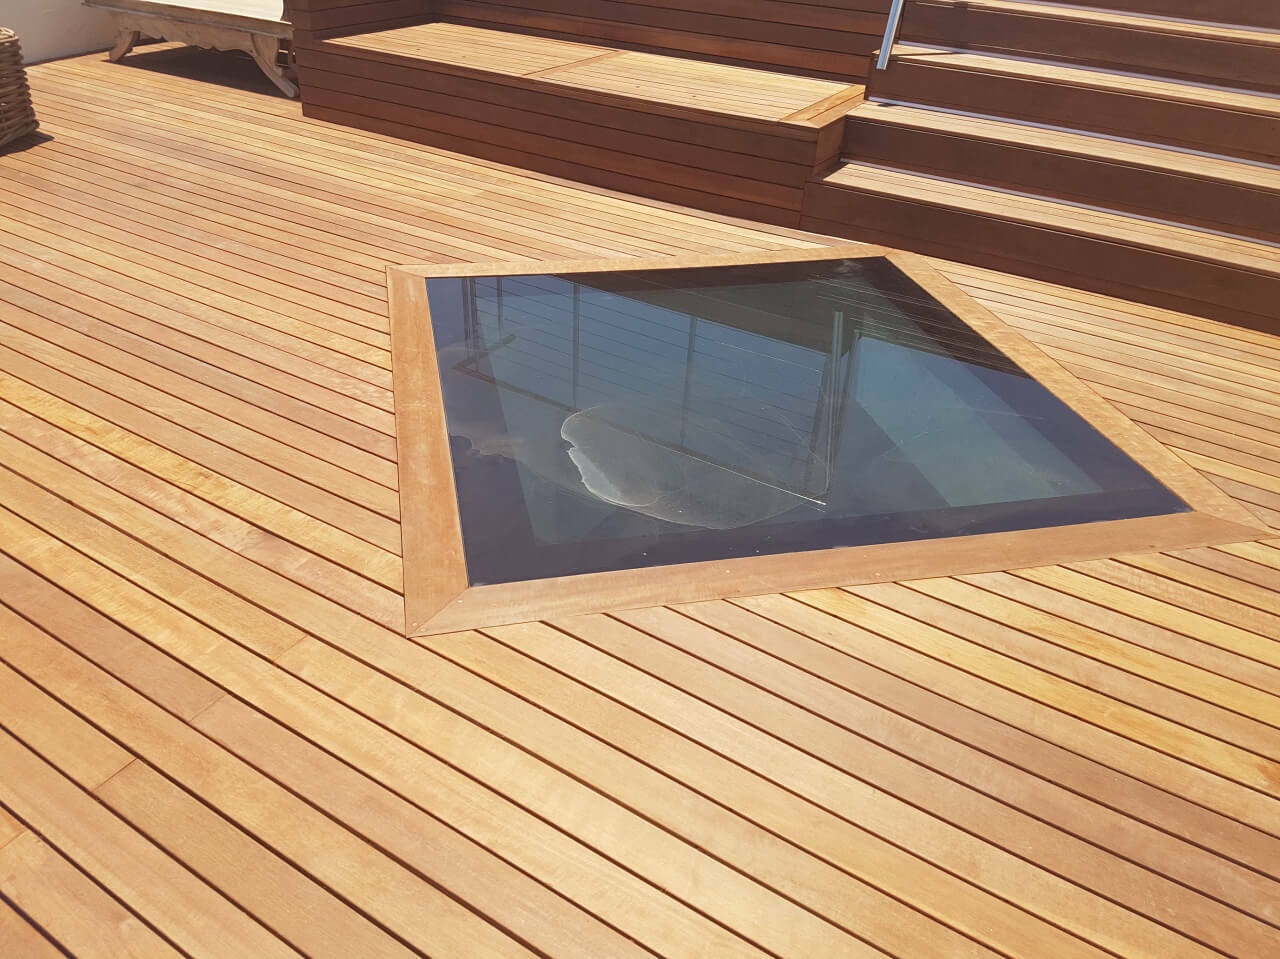 Timber deck with glass window integrated